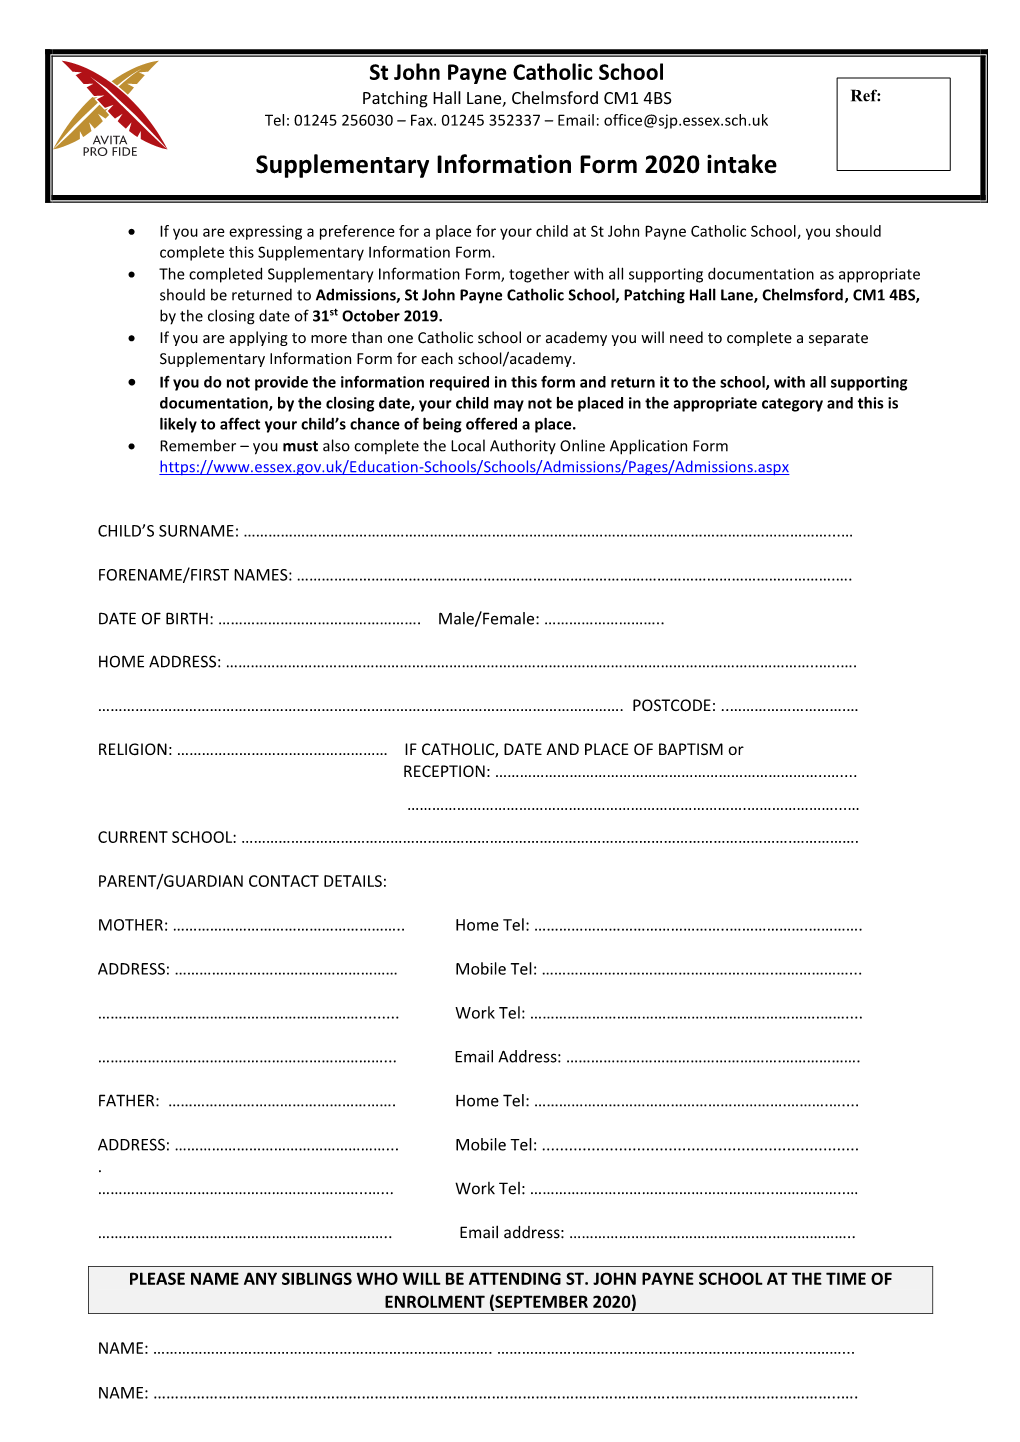 Supplementary Information Form 2020 Intake